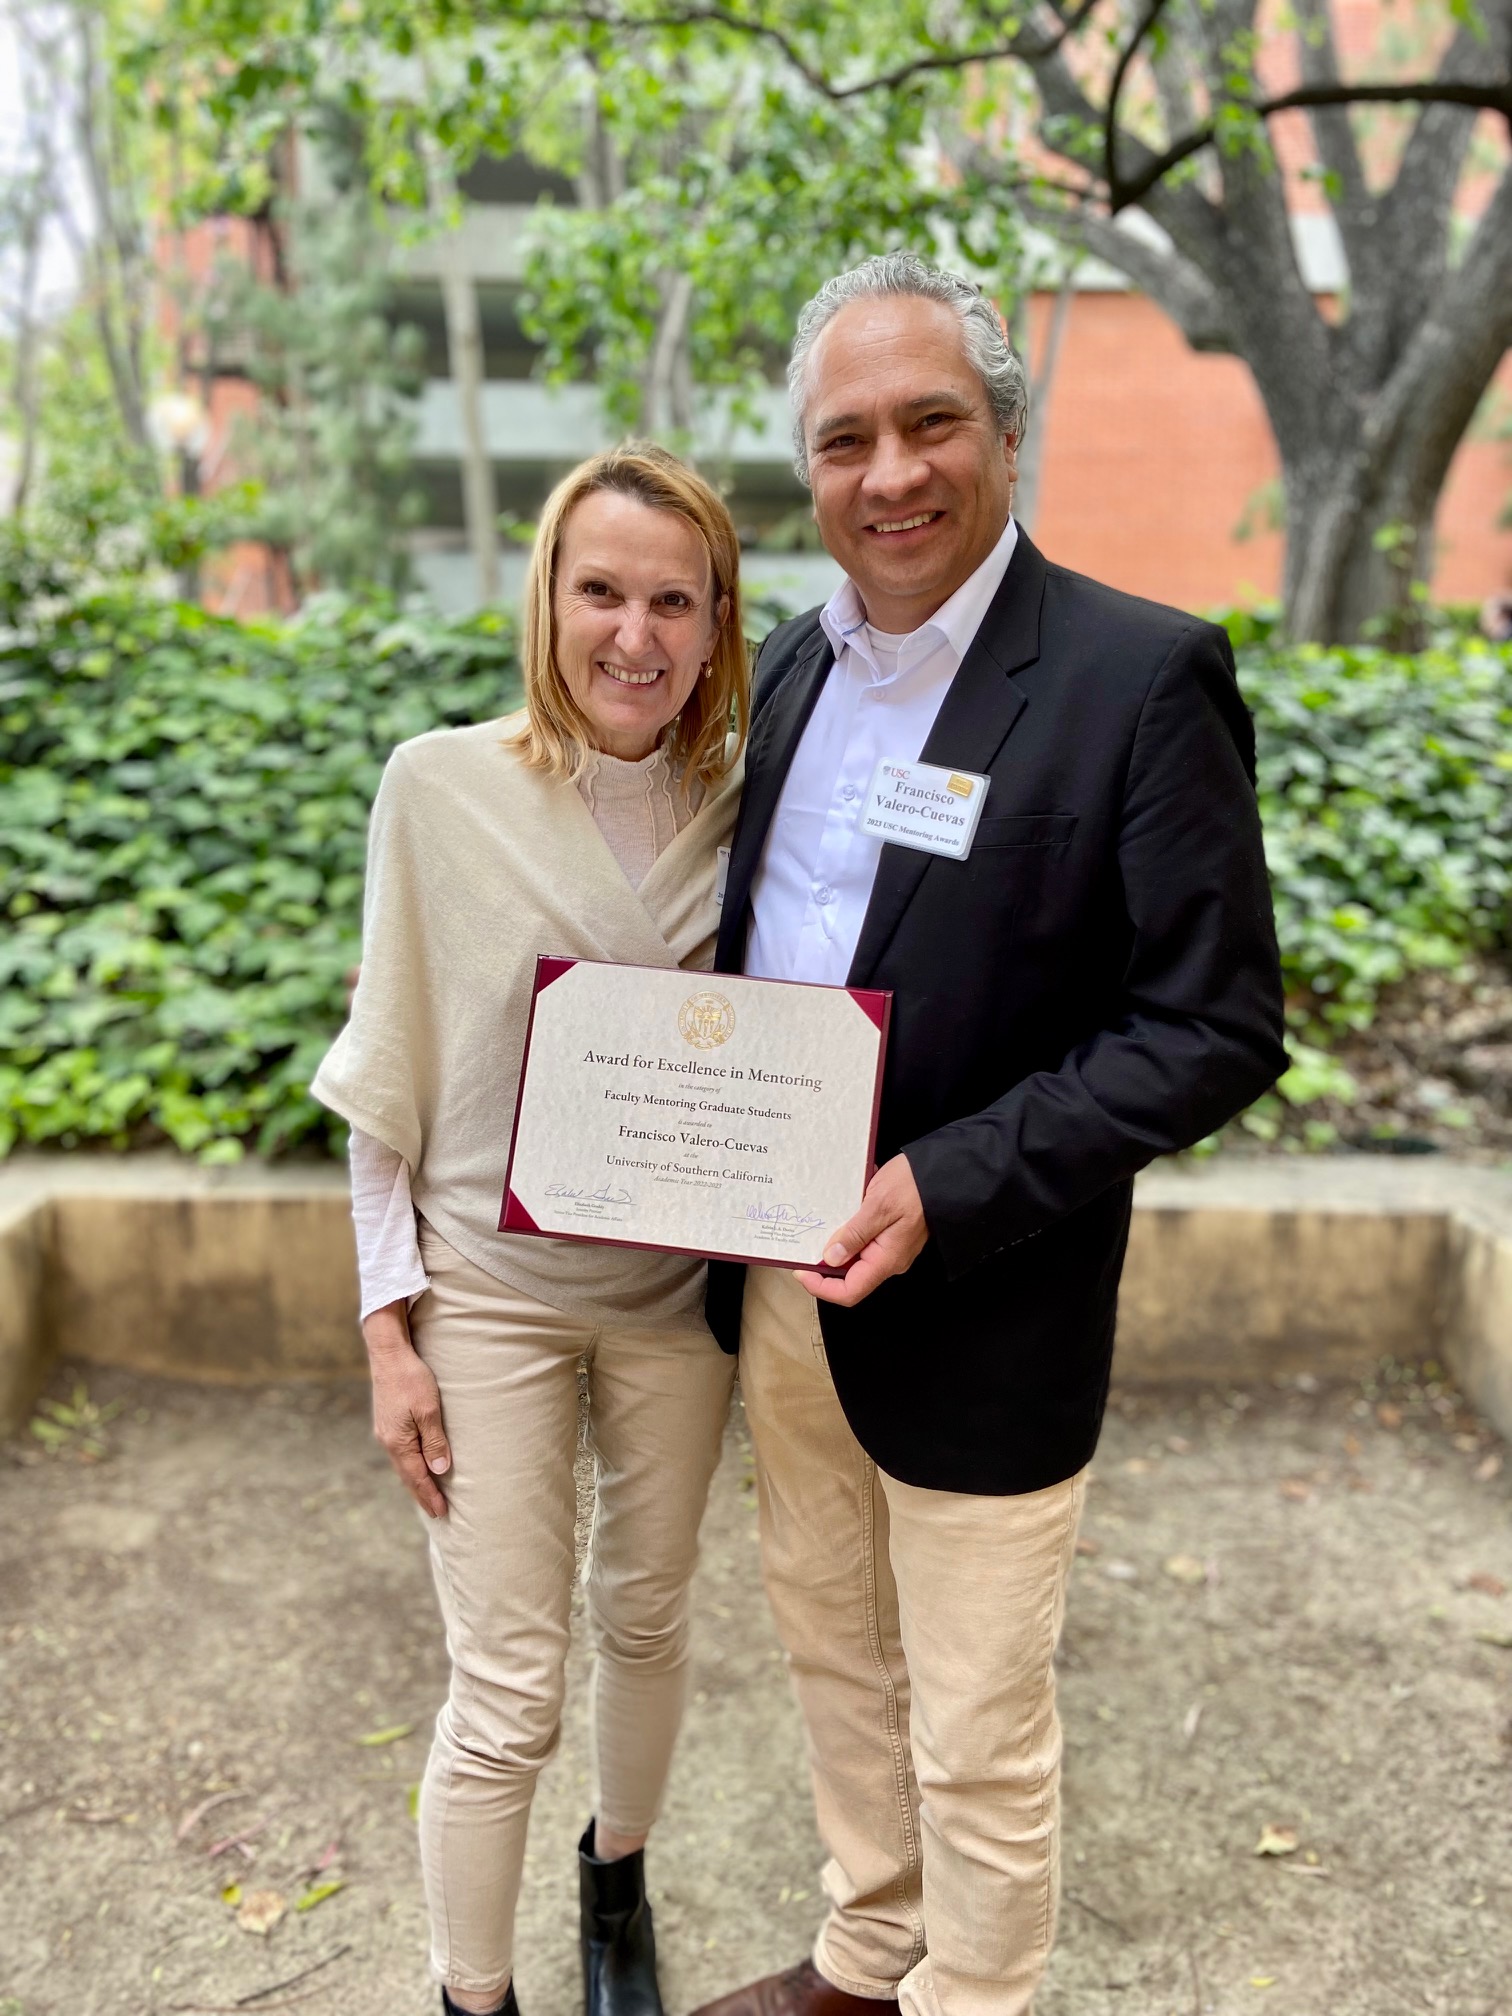 Dr. Francisco Valero-Cuevas (right) smiles for the camera with his wife, Erica (left). Francisco is holding the award he received for Excellence in Mentoring in front of him.